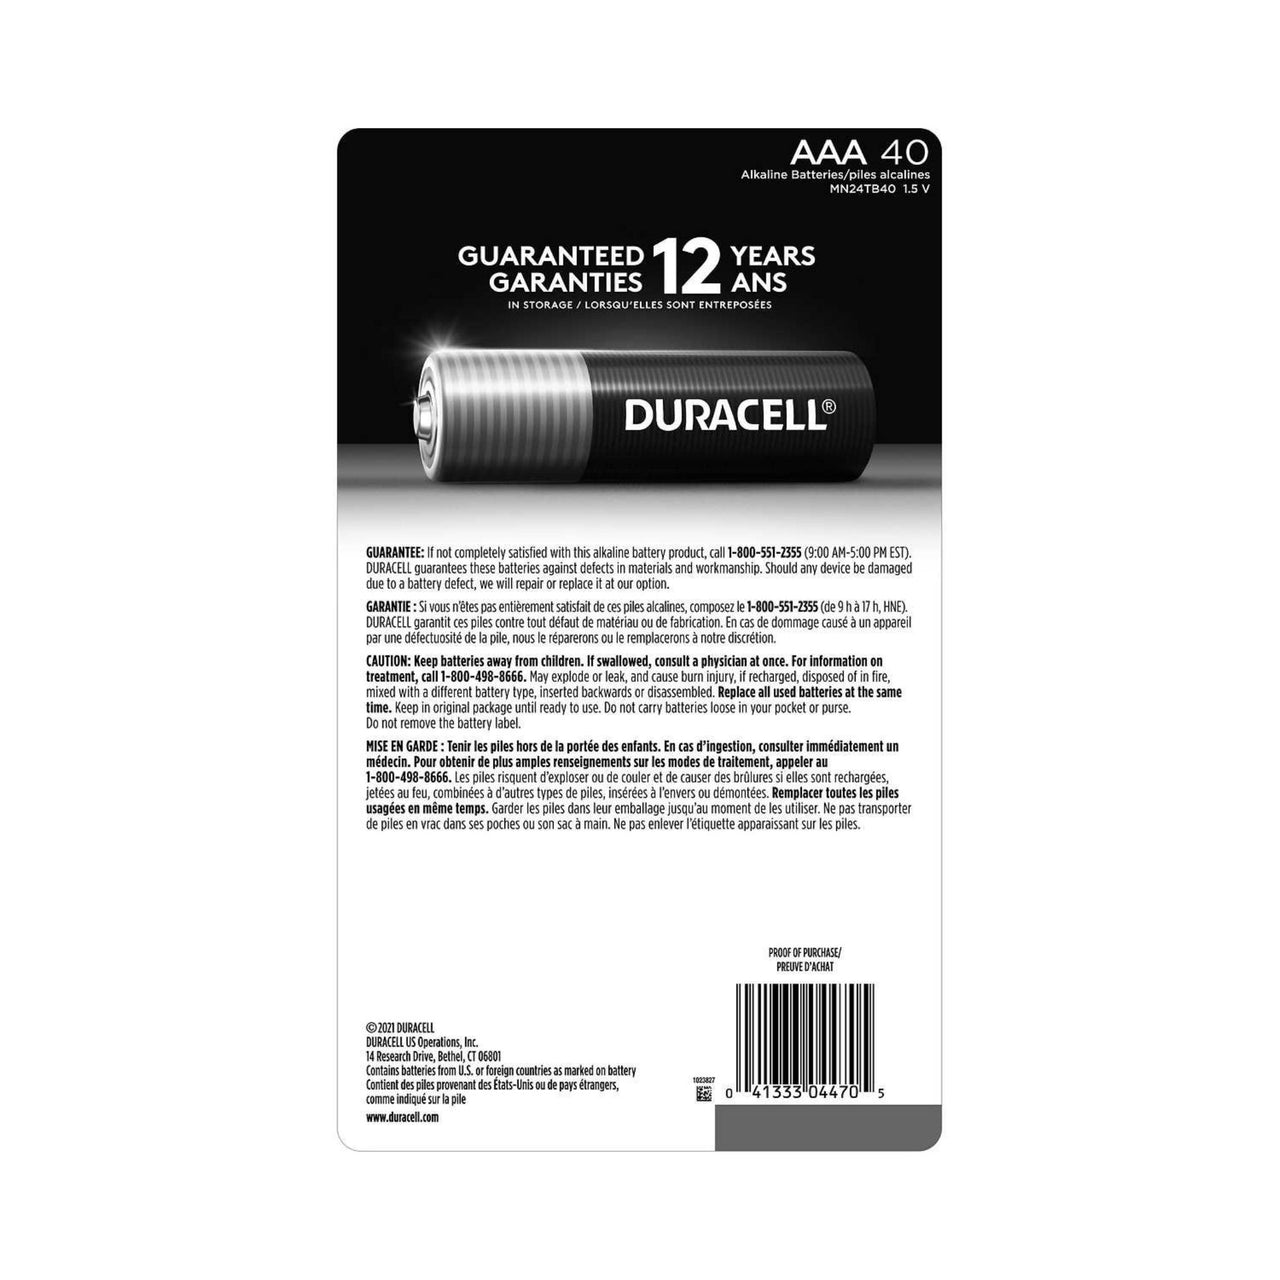 Image of Duracell CopperTop AAA Batteries with PowerBoost Ingredients, 30 count - 1 x 1.07 Kilos